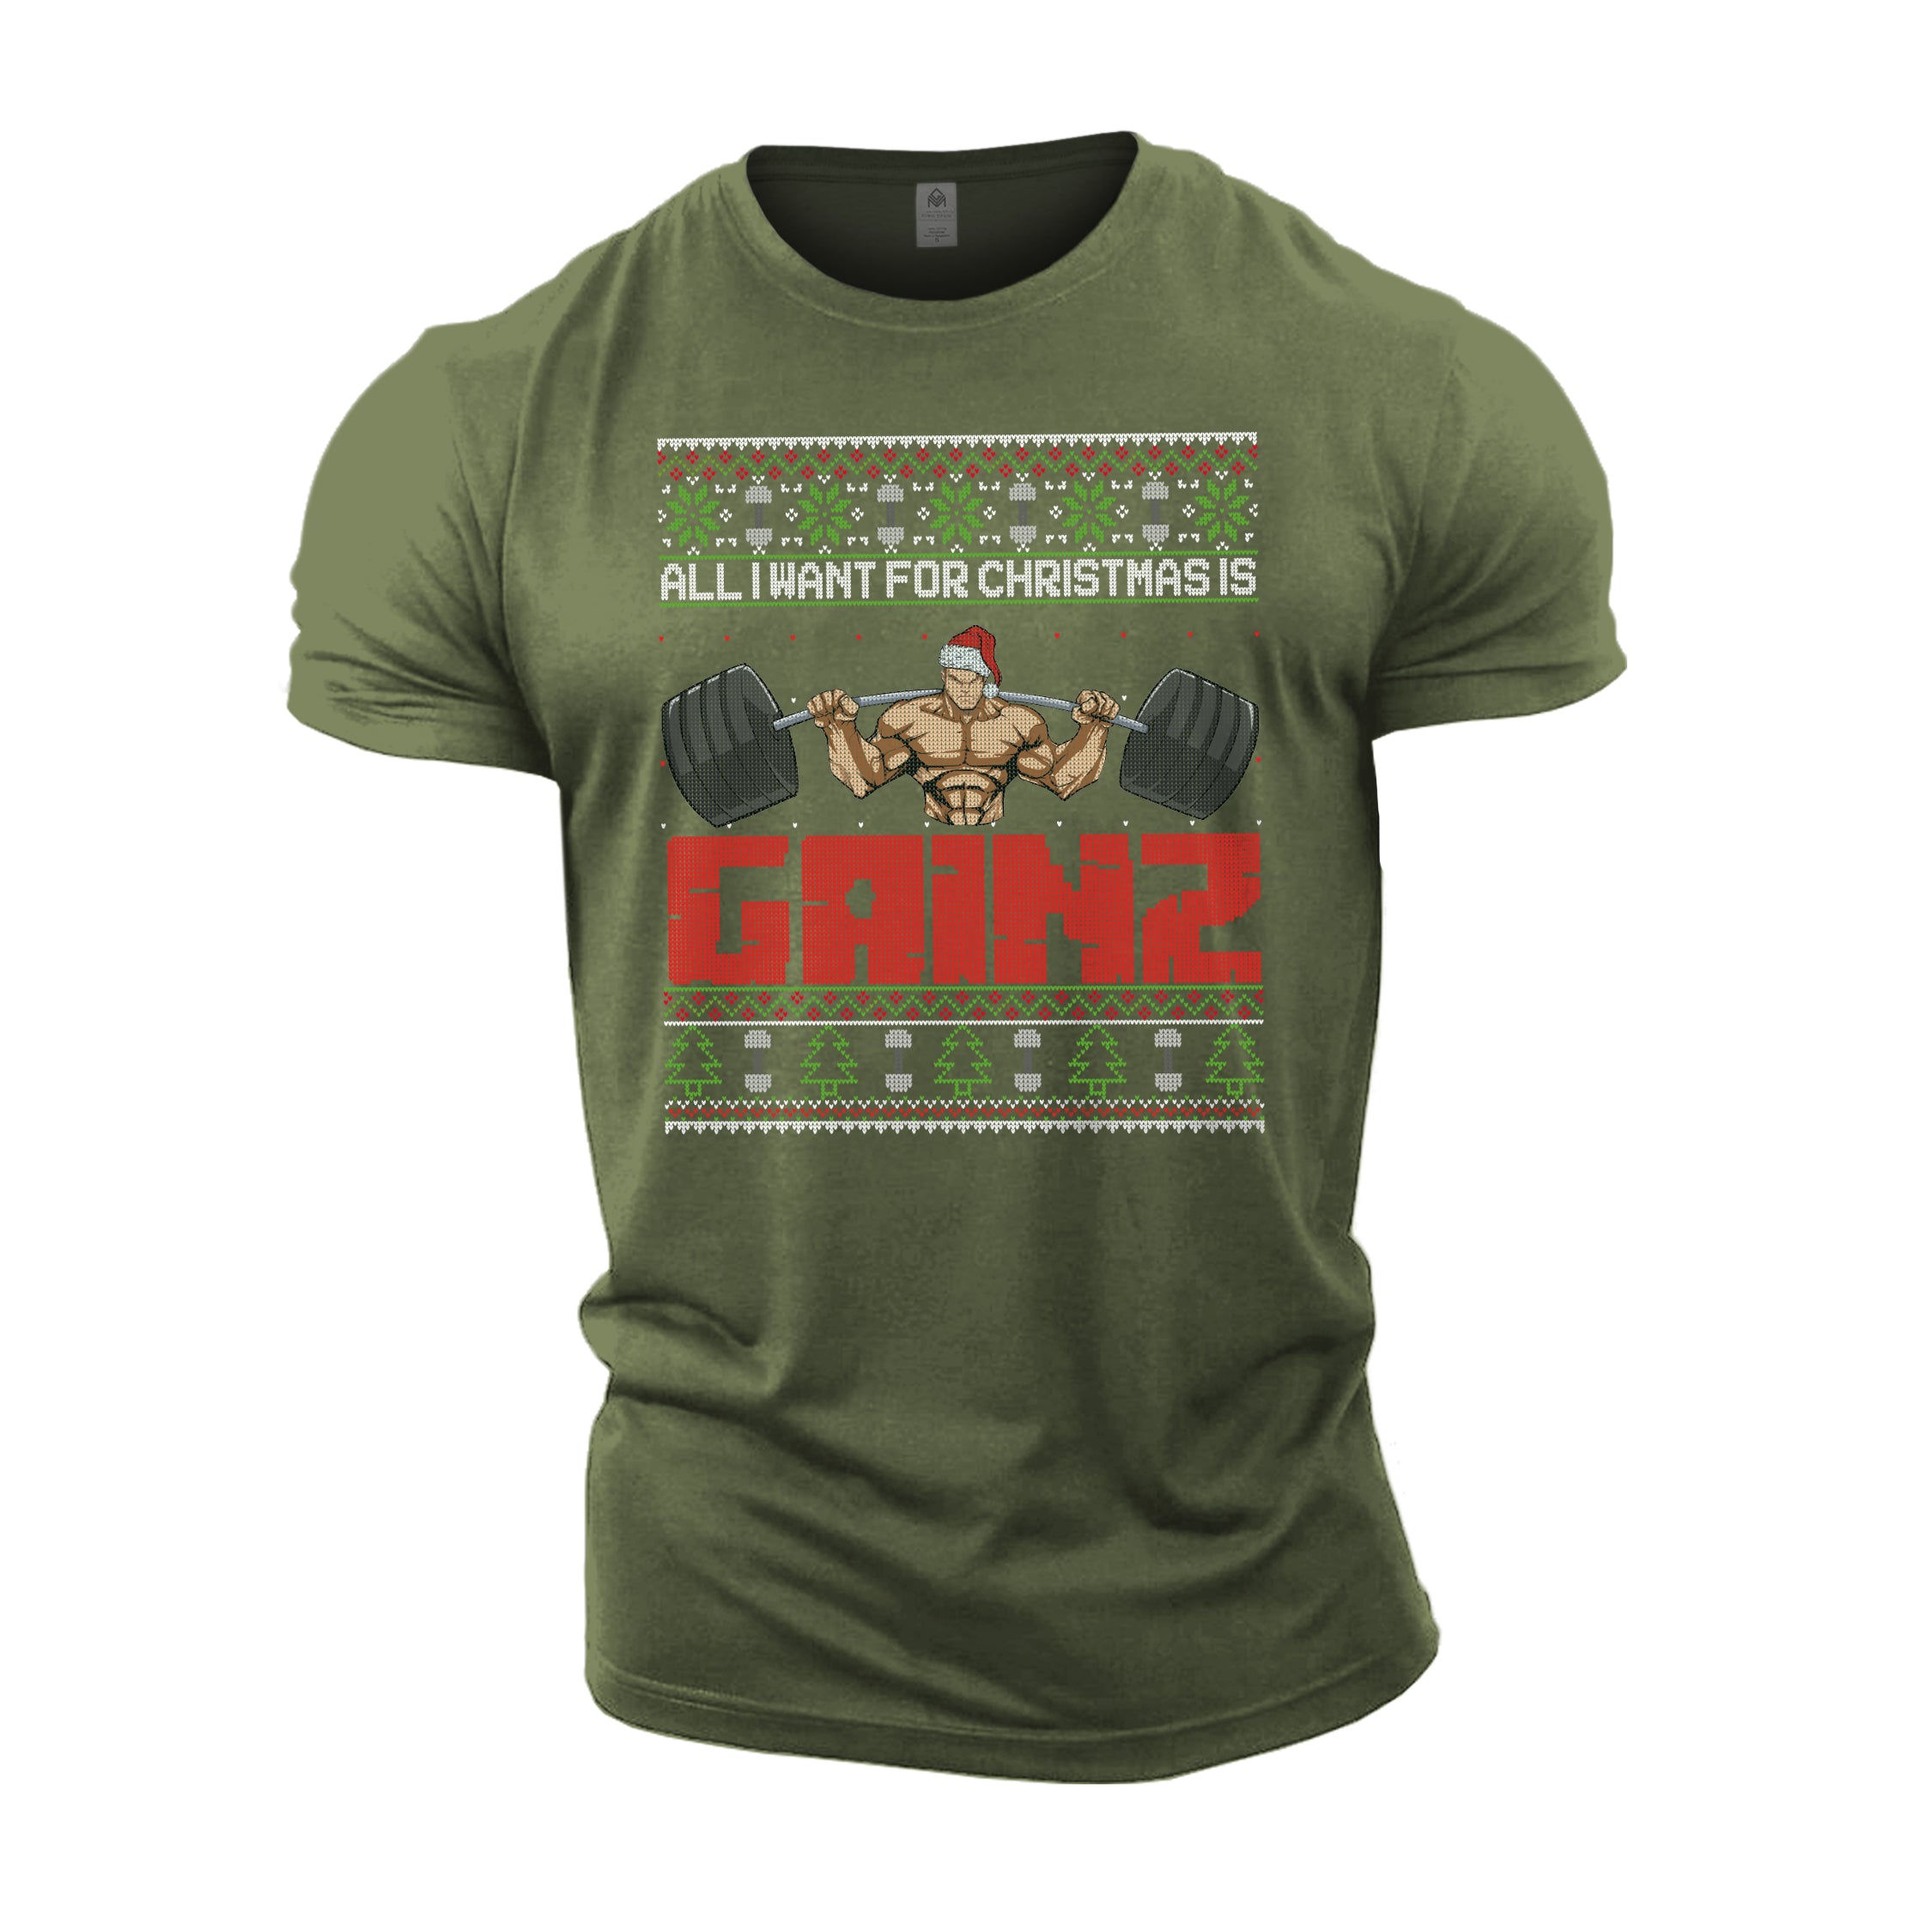 All I Want For Christmas Is GAINZ - Gym T-Shirt